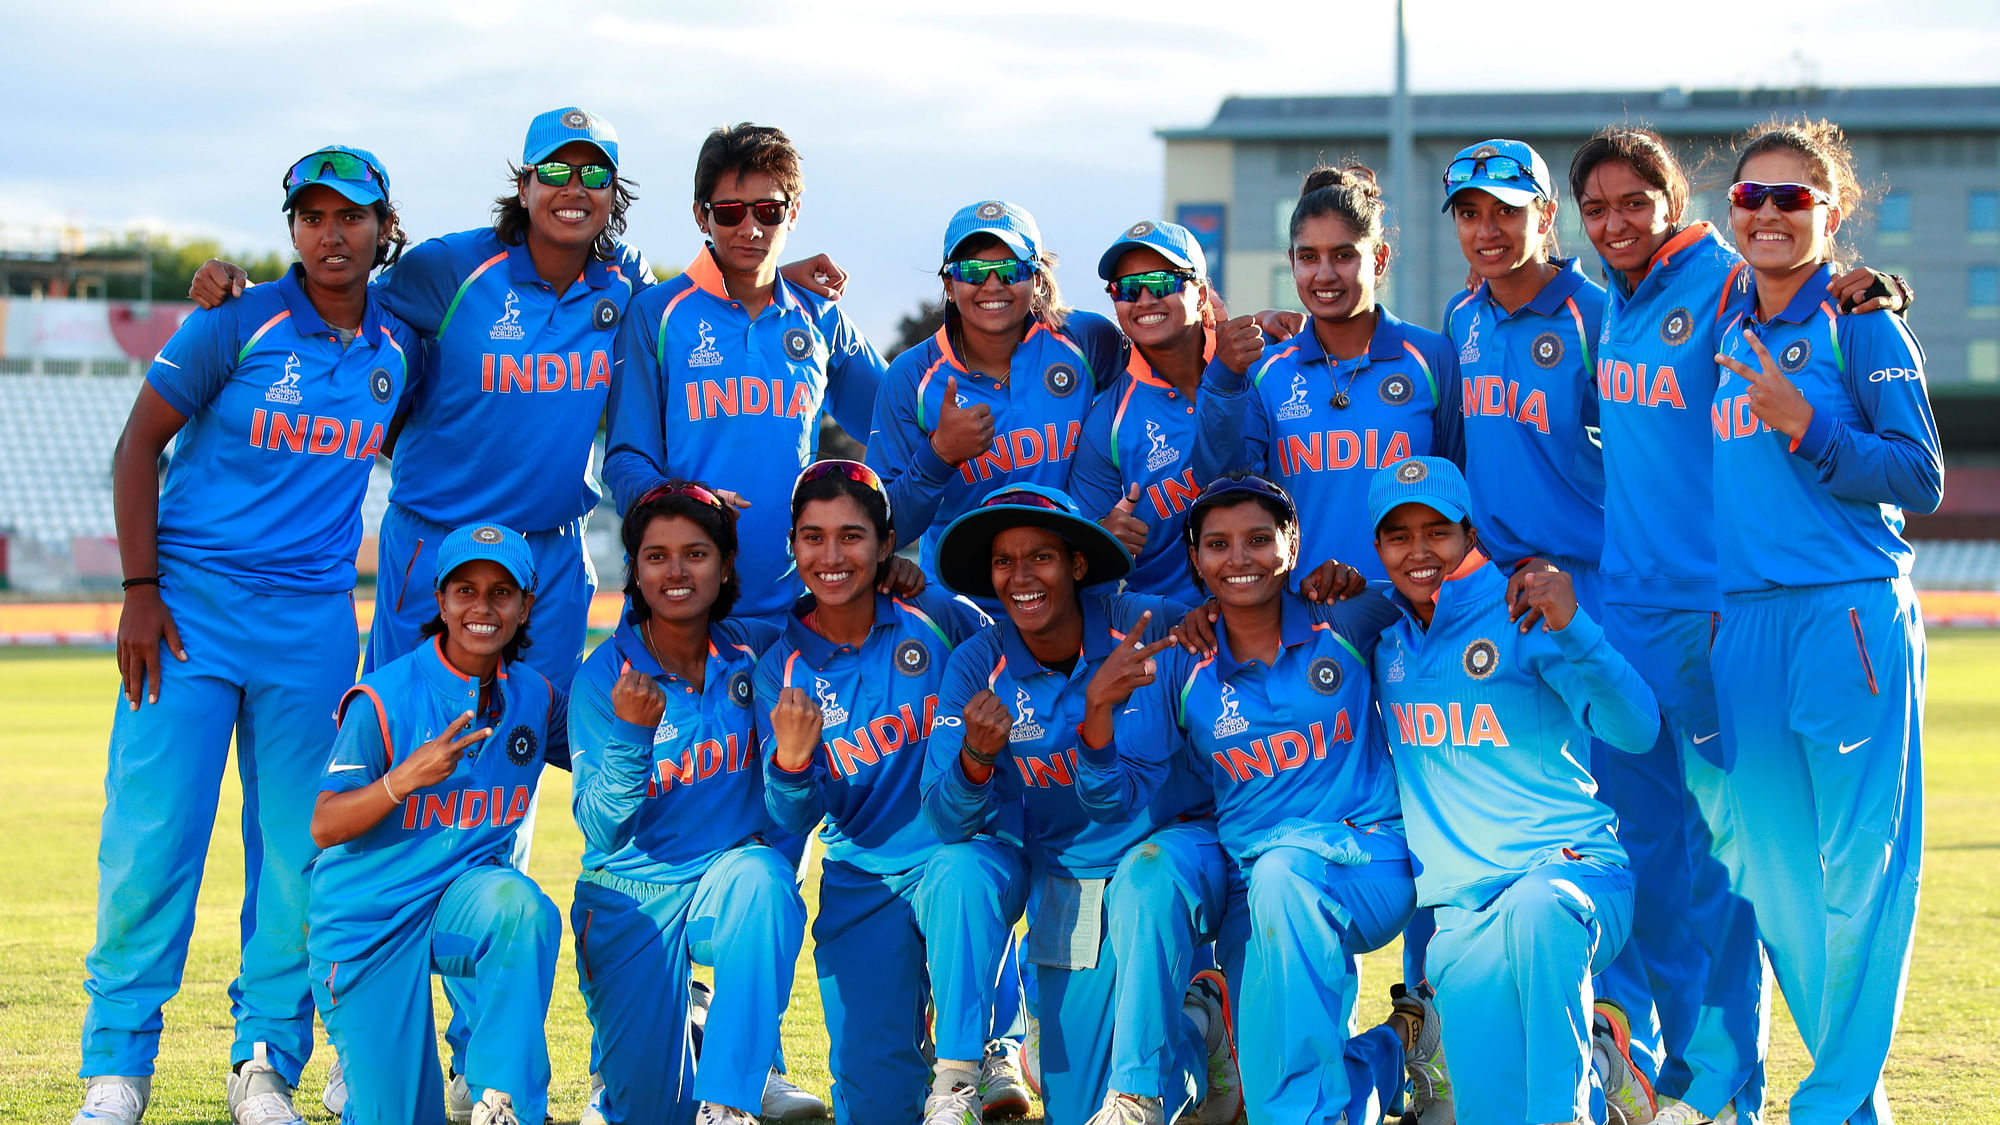 India take on England in their second ICC Women’s World Cup final in London on Sunday.